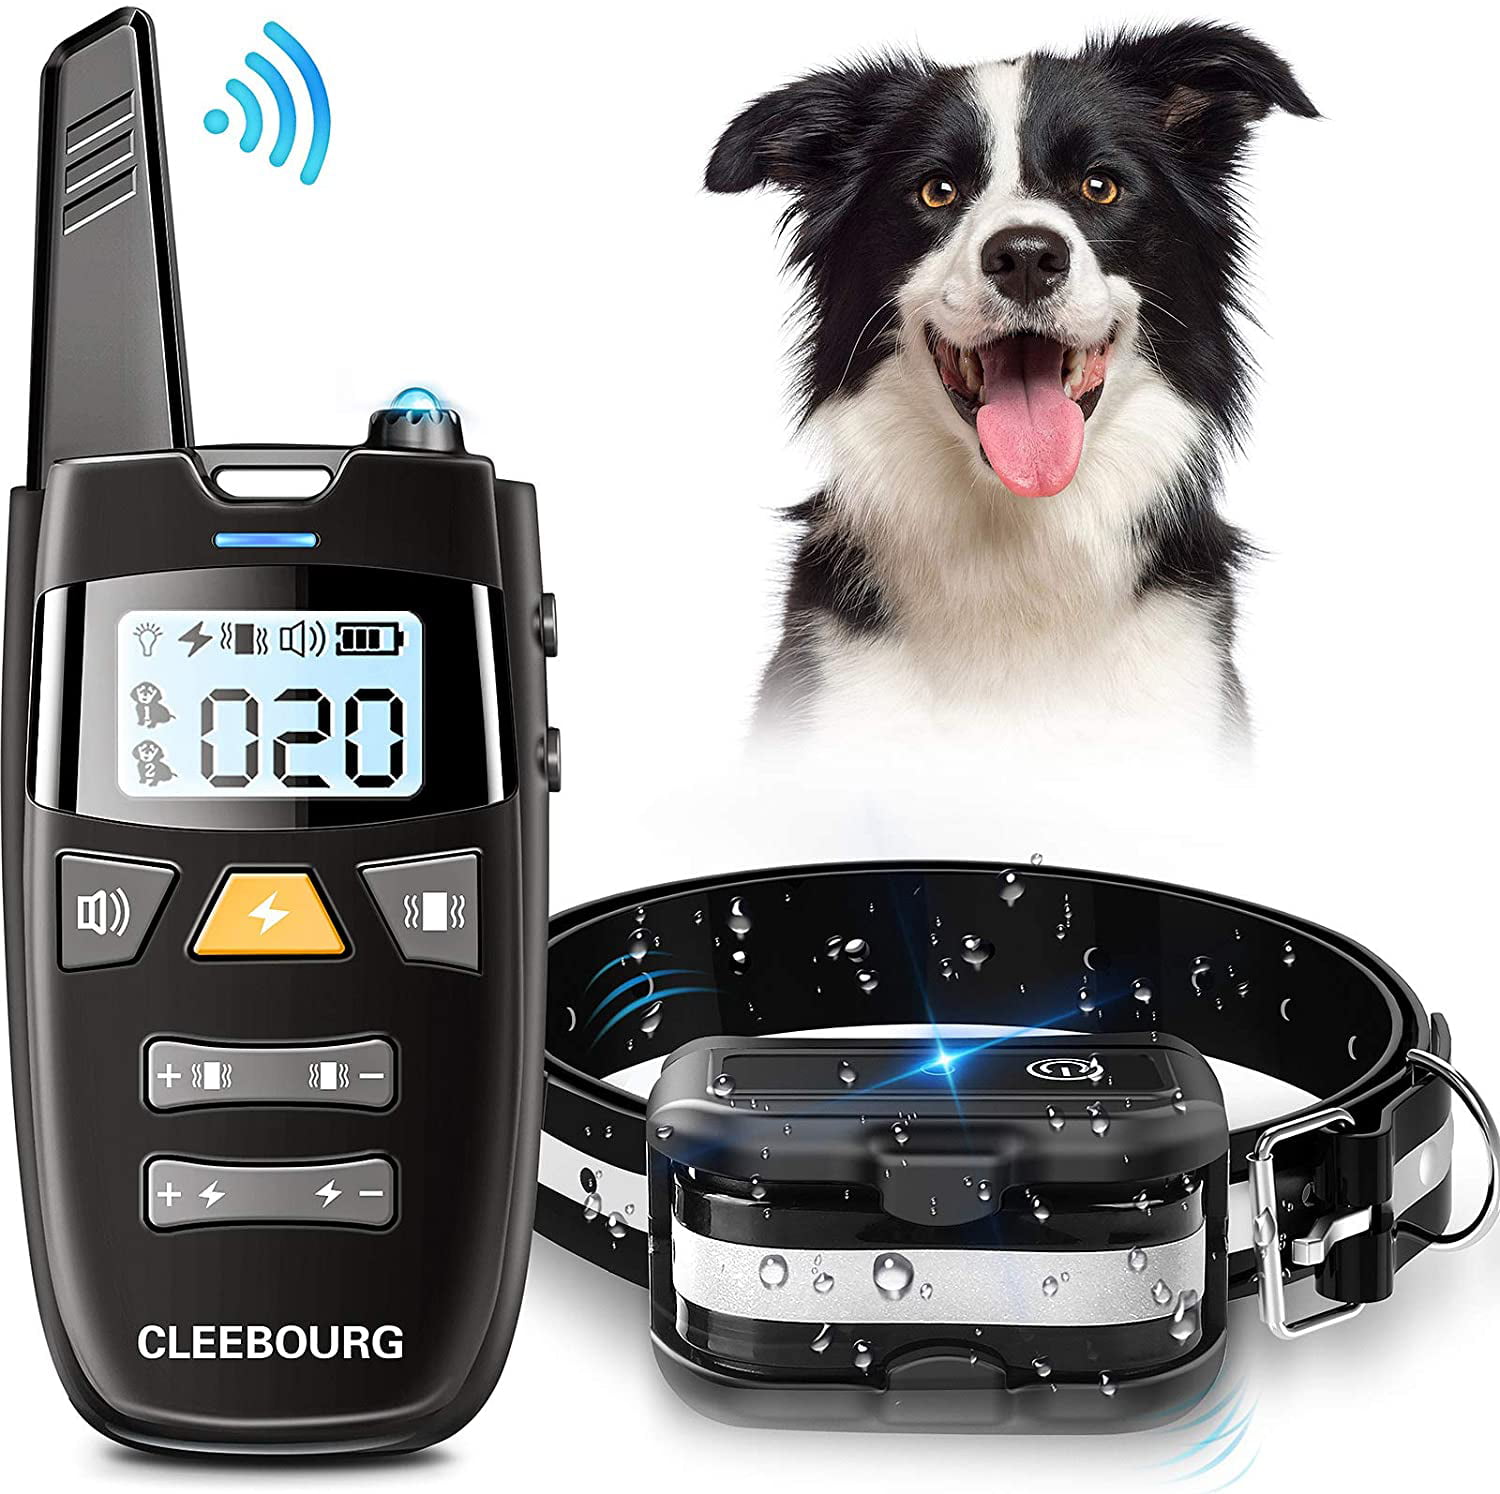 Safe Humane Anti-Bark Device Shock Modes for Small Medium Large Dogs Black PetsHub Dog Bark Collar Vibration Rechargeable Barking Collar for Dogs with Beep 